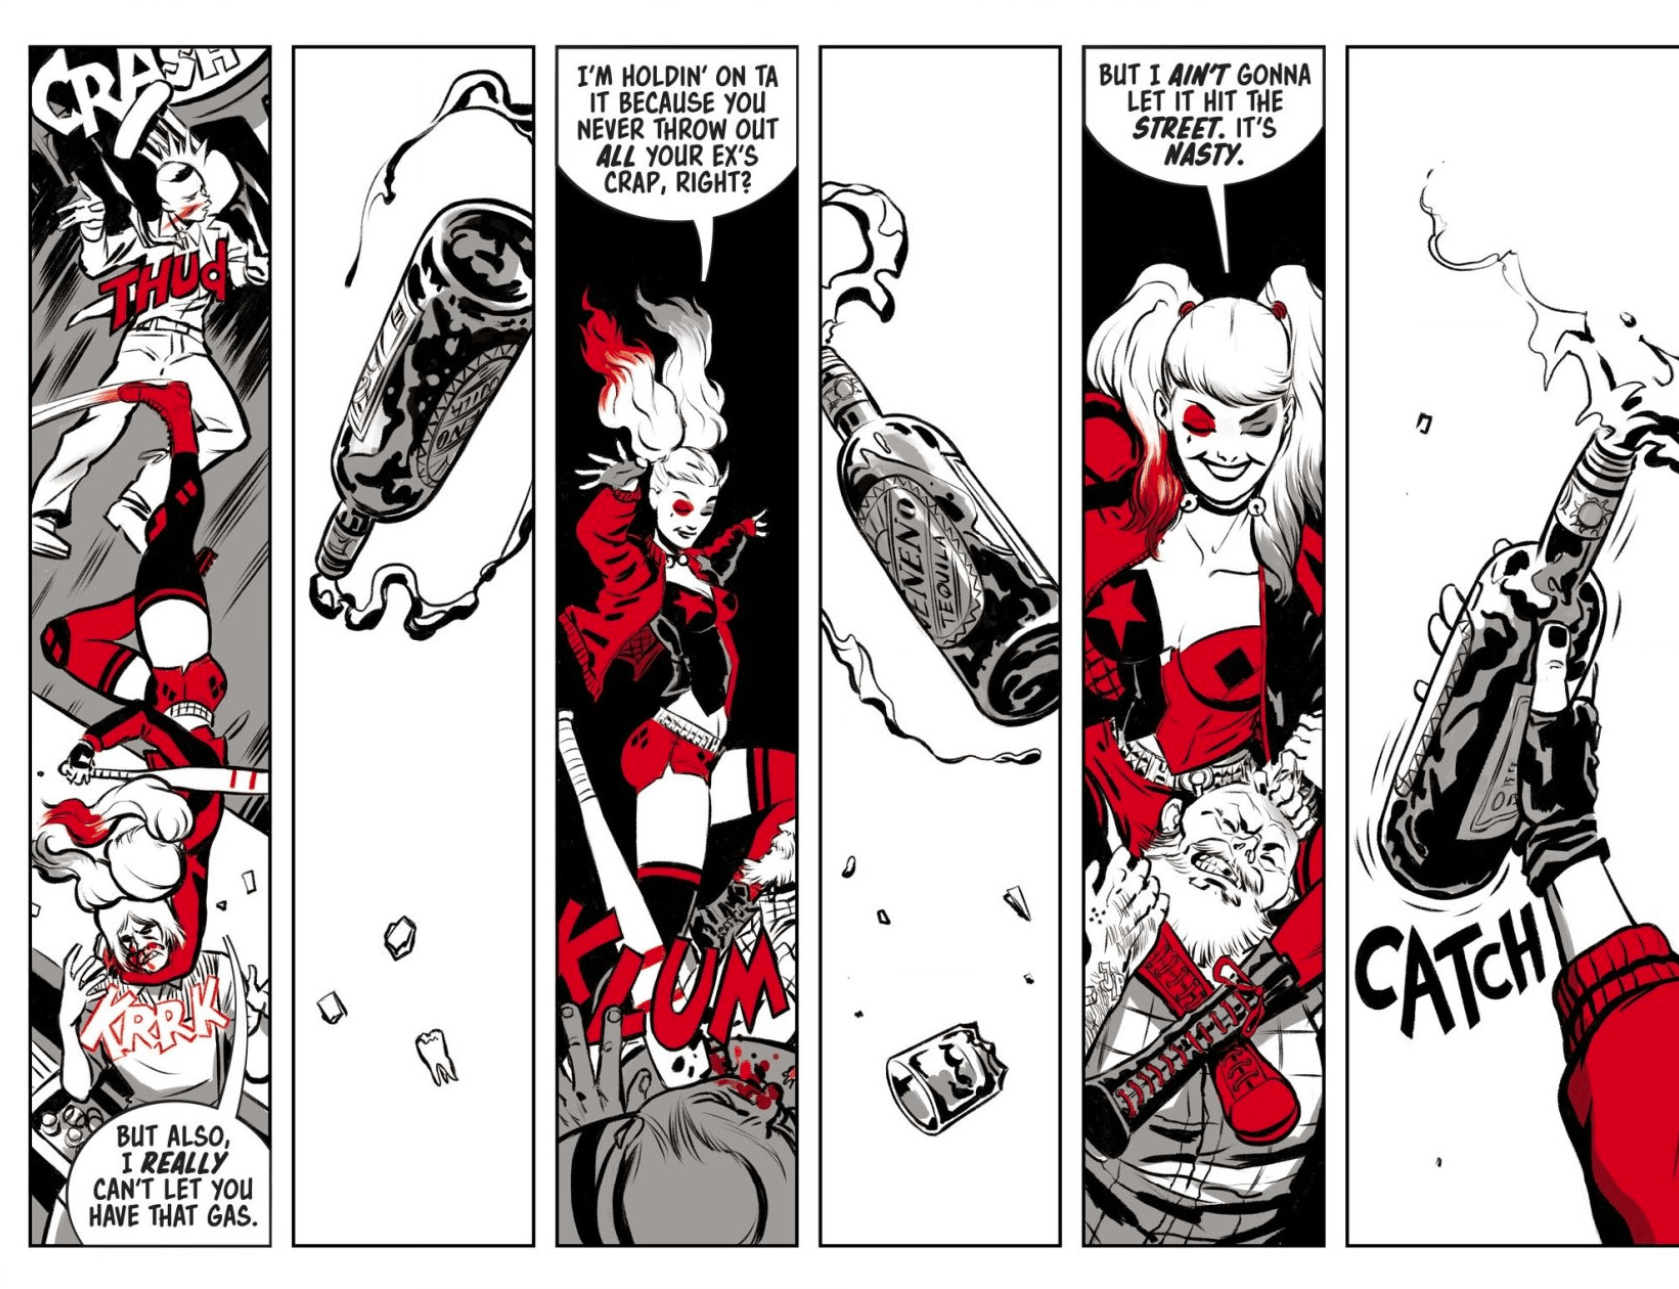 Harley Quinn’s Newest Comic is a Clever Celebration of Her Evolving Identity